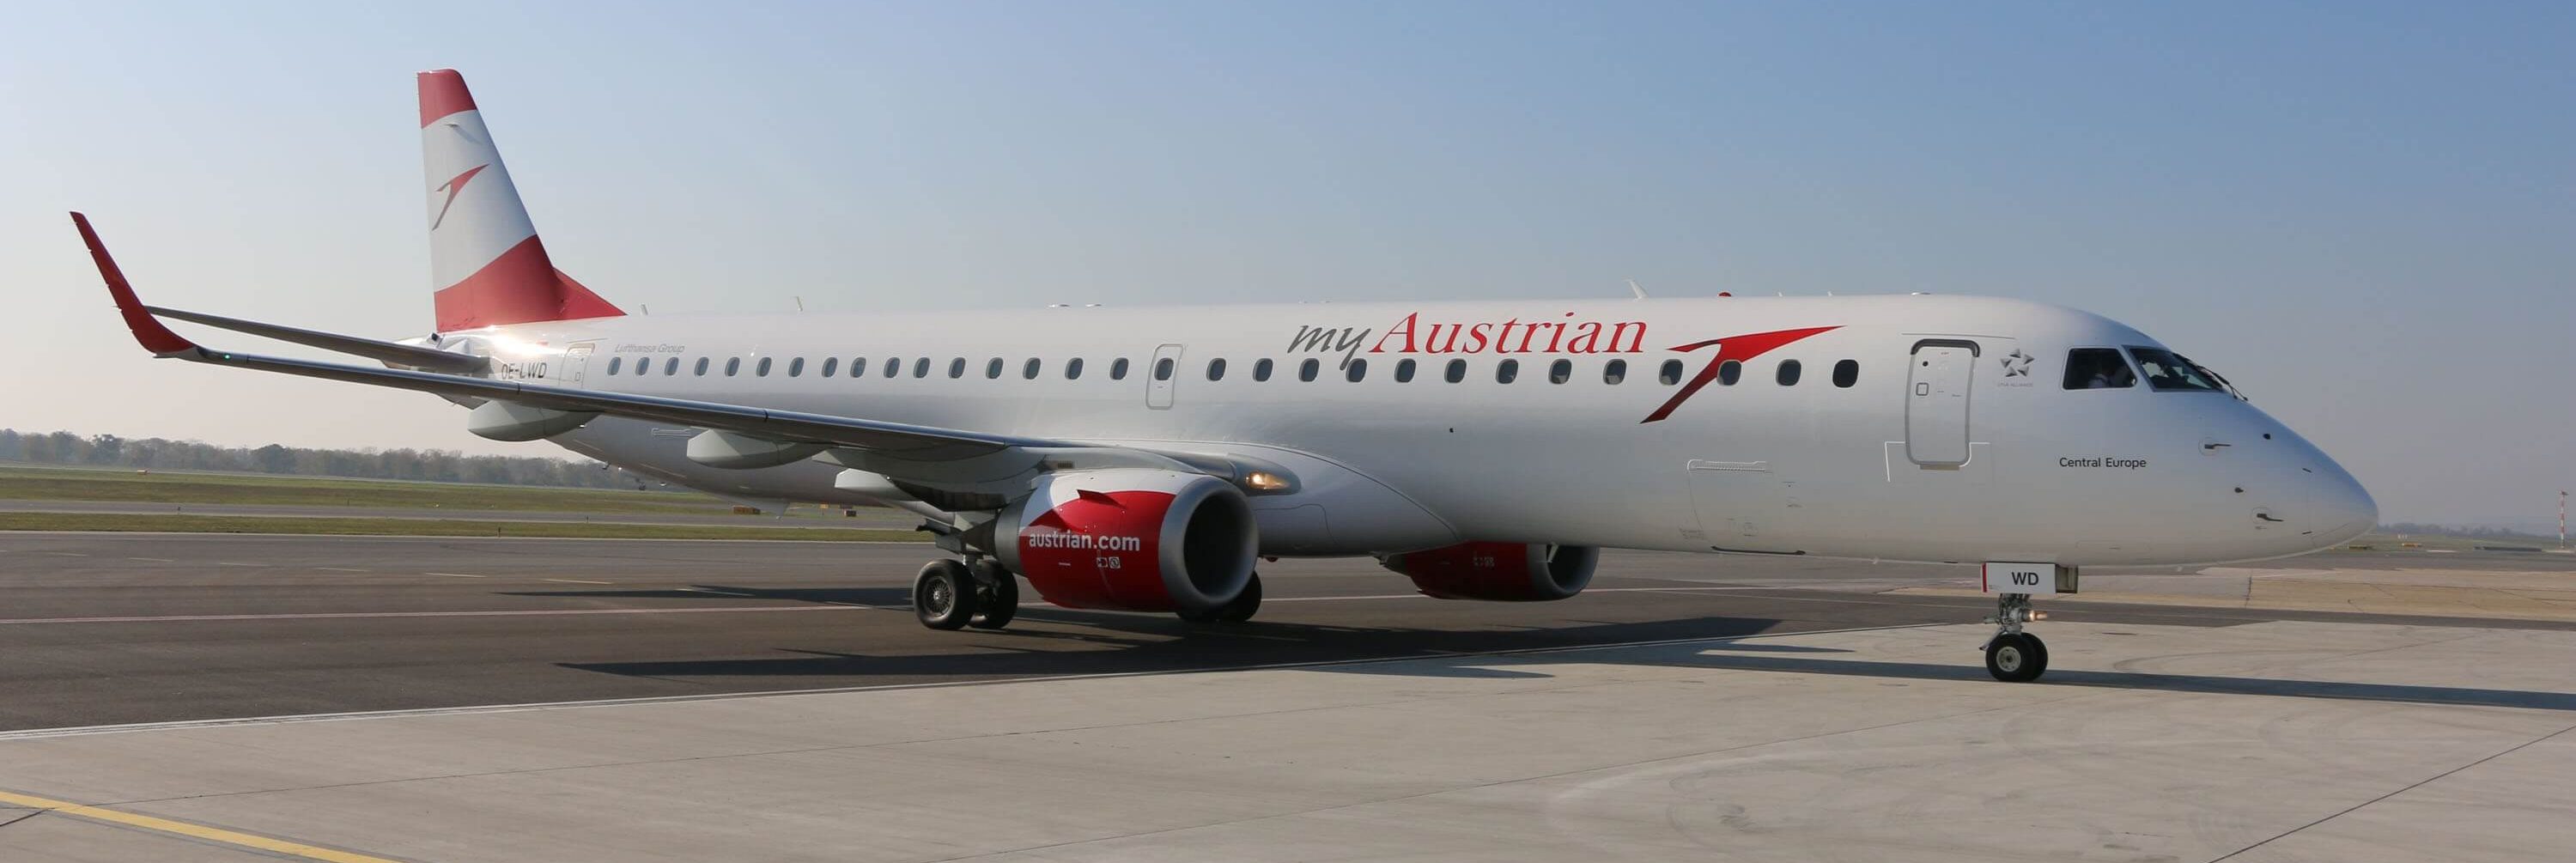 Czech Airlines Technics enters into base maintenance agreement with Austrian Airlines